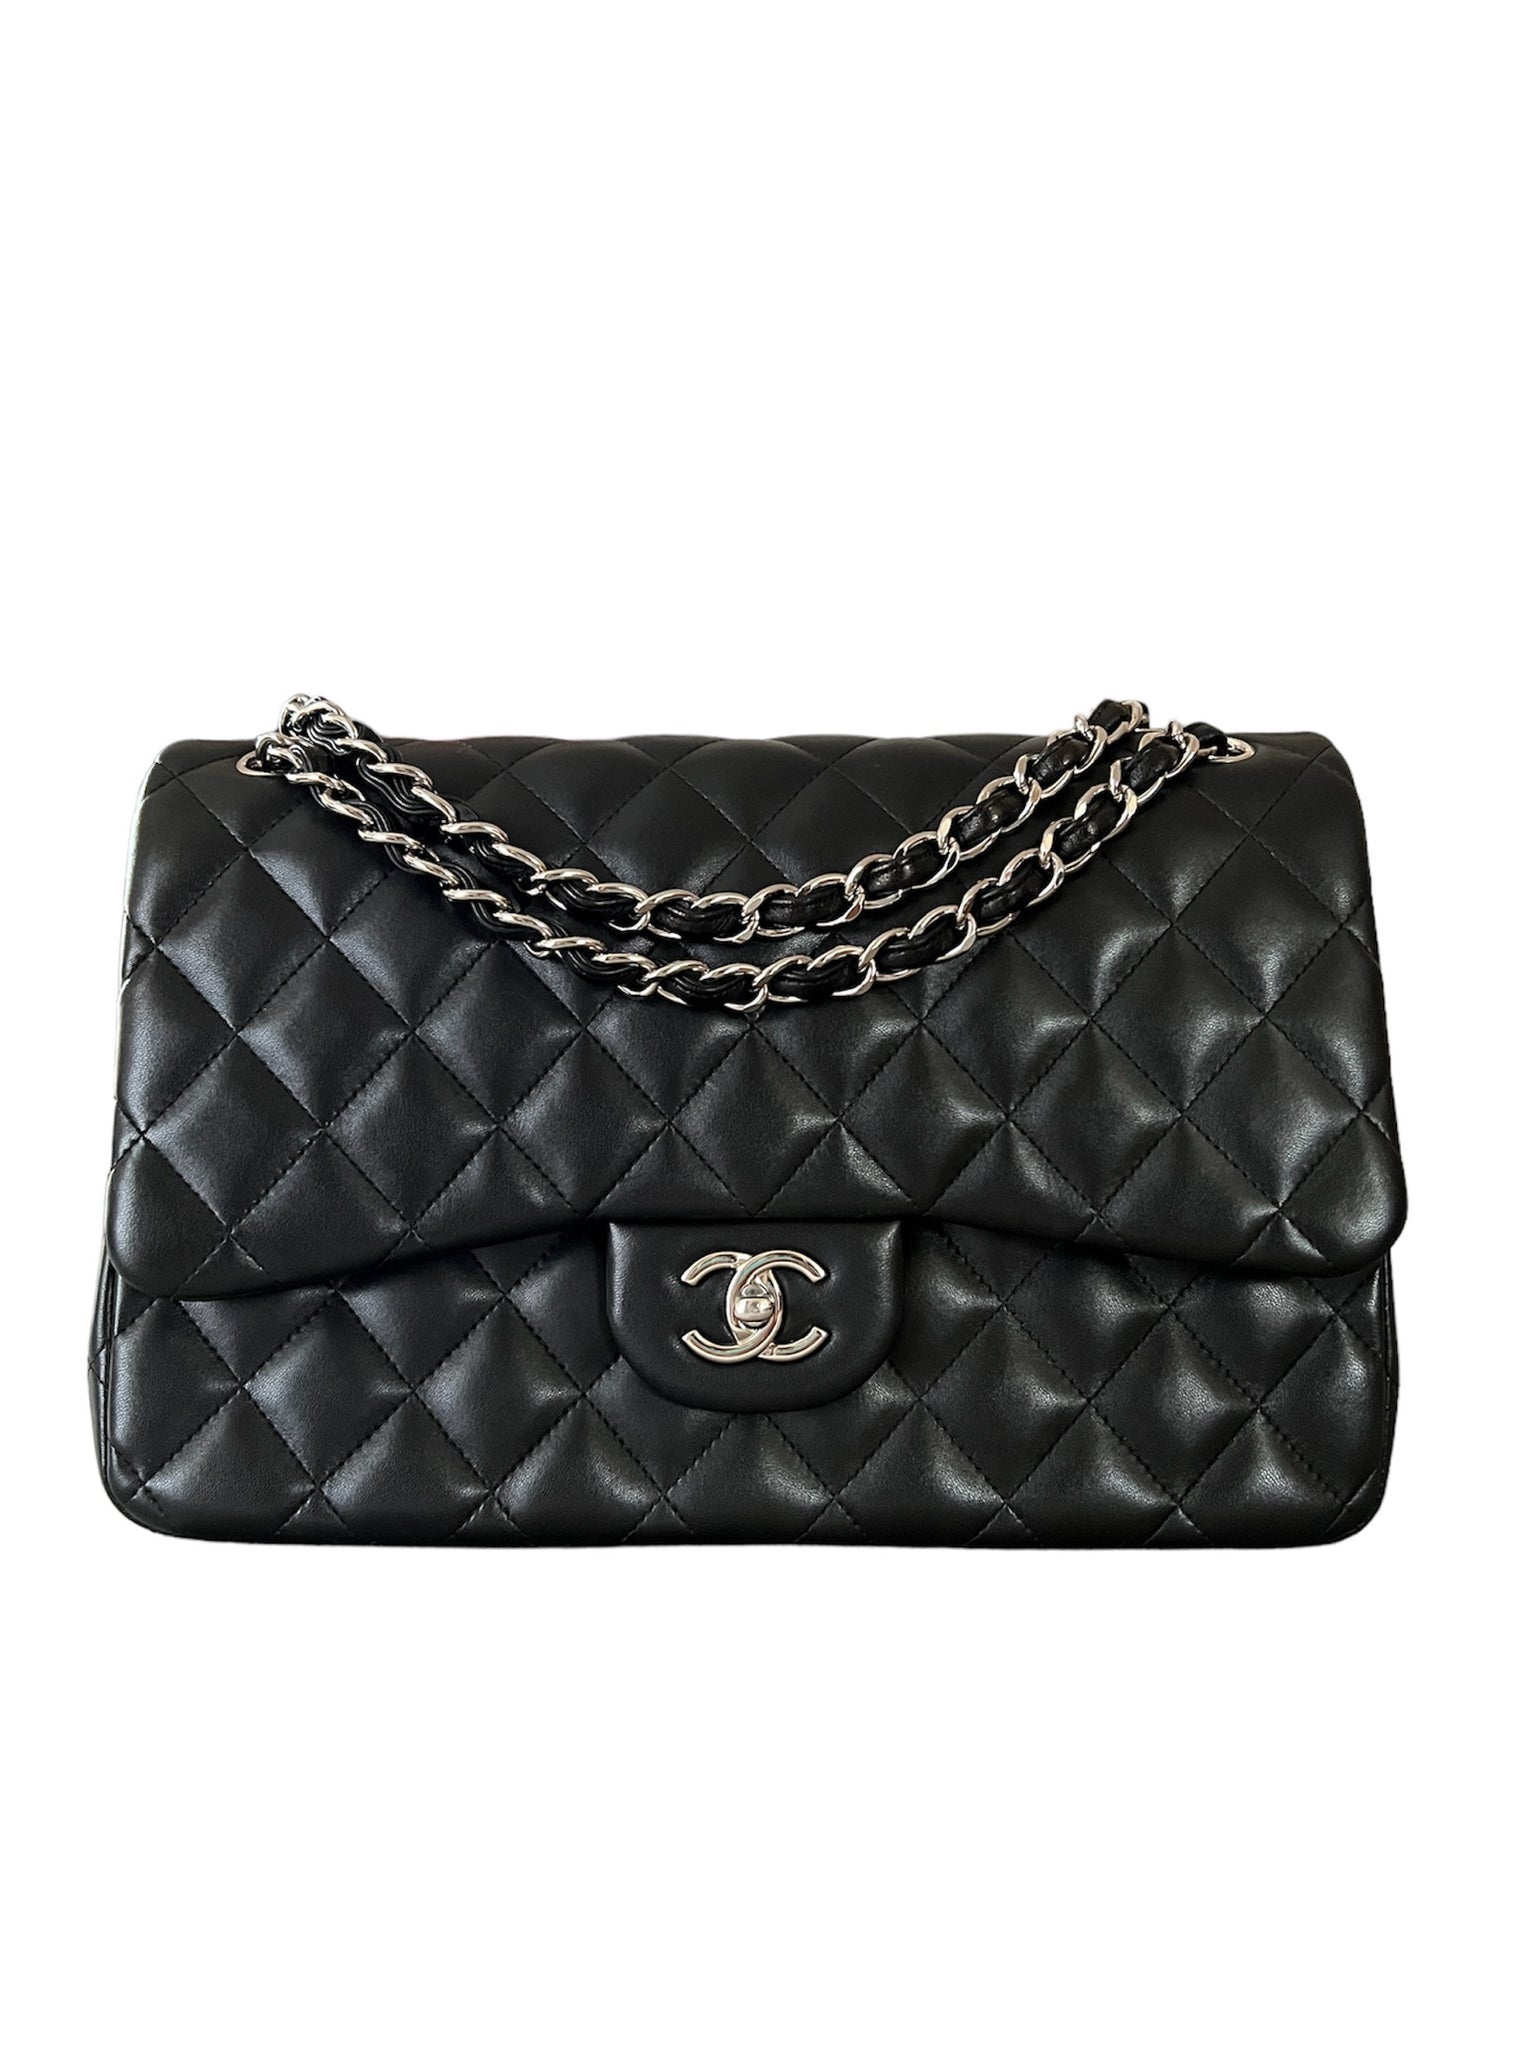 Chanel Timeless / Classic Maxi Jumbo Vintage bag in black leather